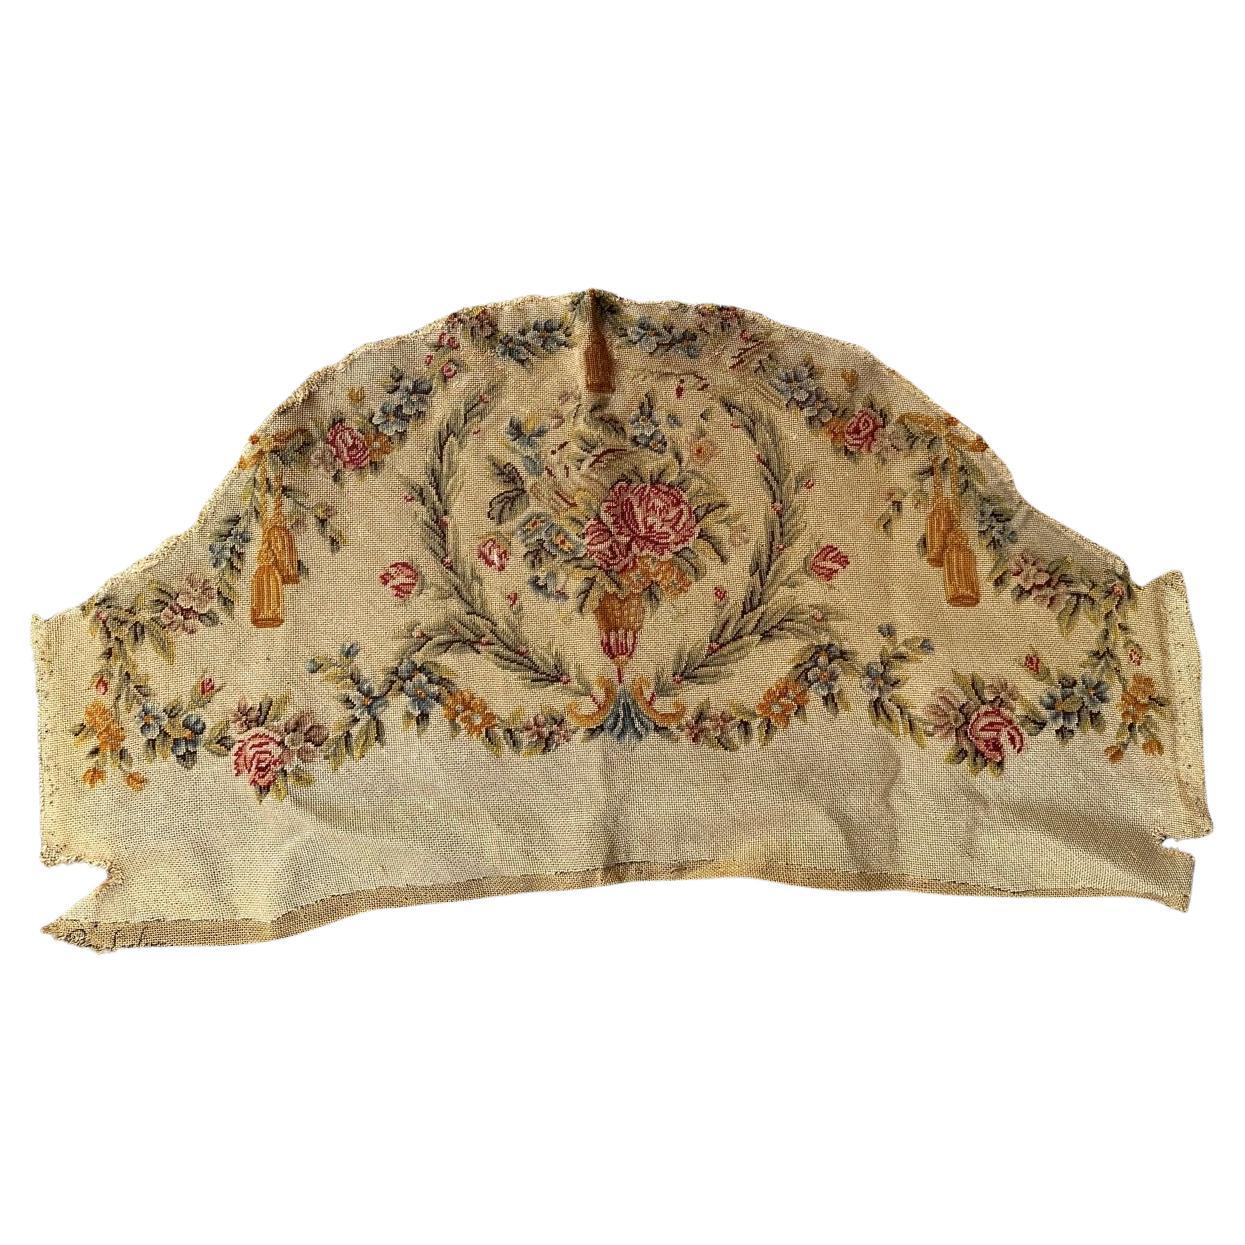 Bobyrug's pretty antique French needlepoint chair cover tapestry 